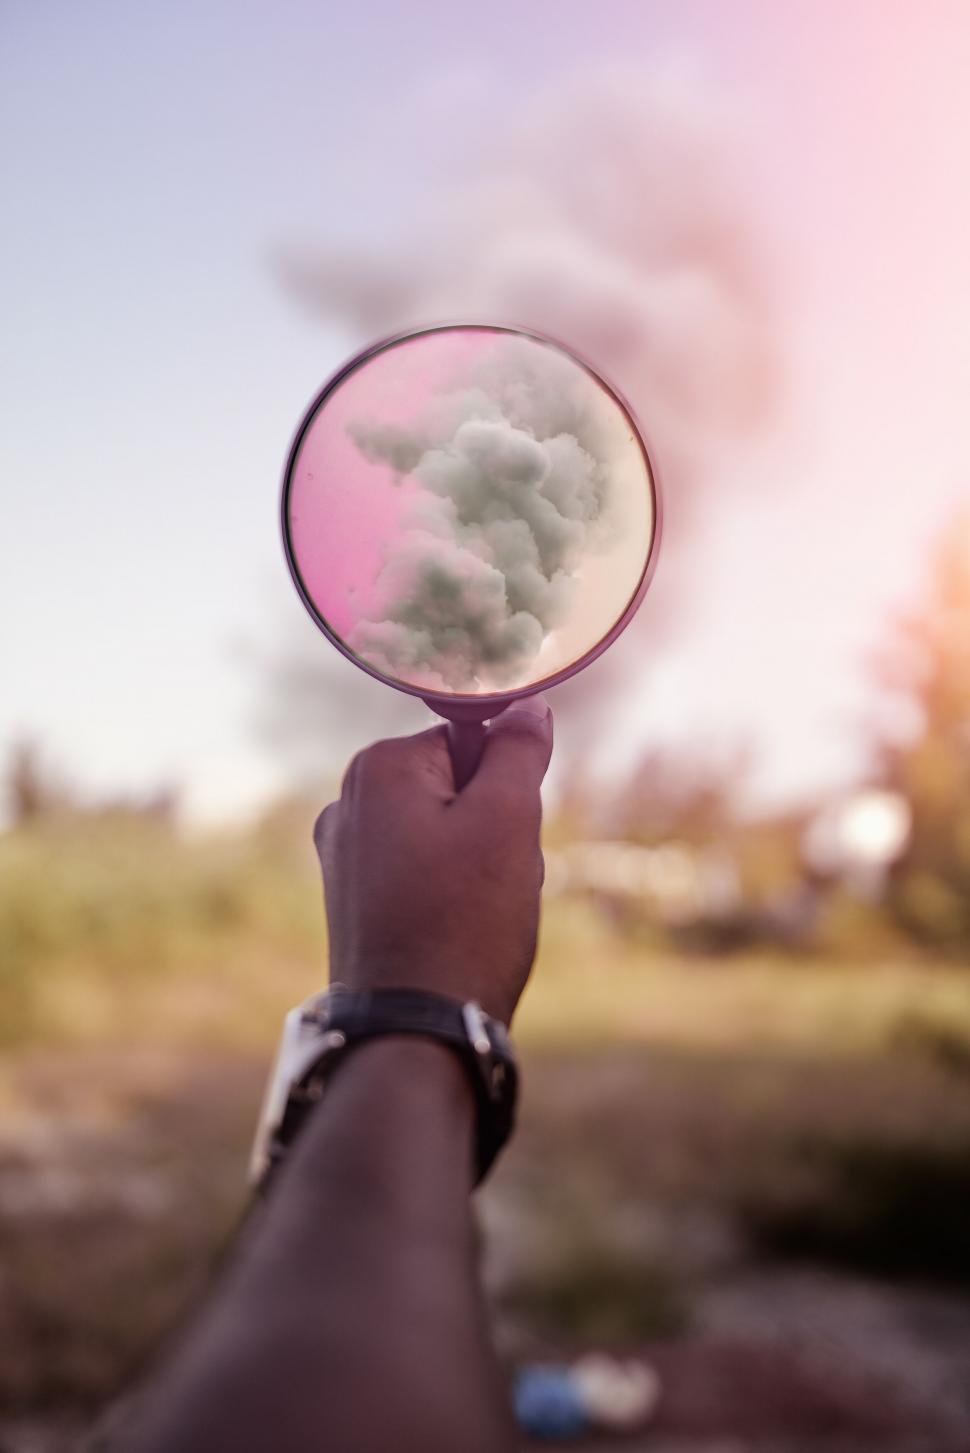 Free Image of A hand holding a magnifying glass with a pink and white cloud 